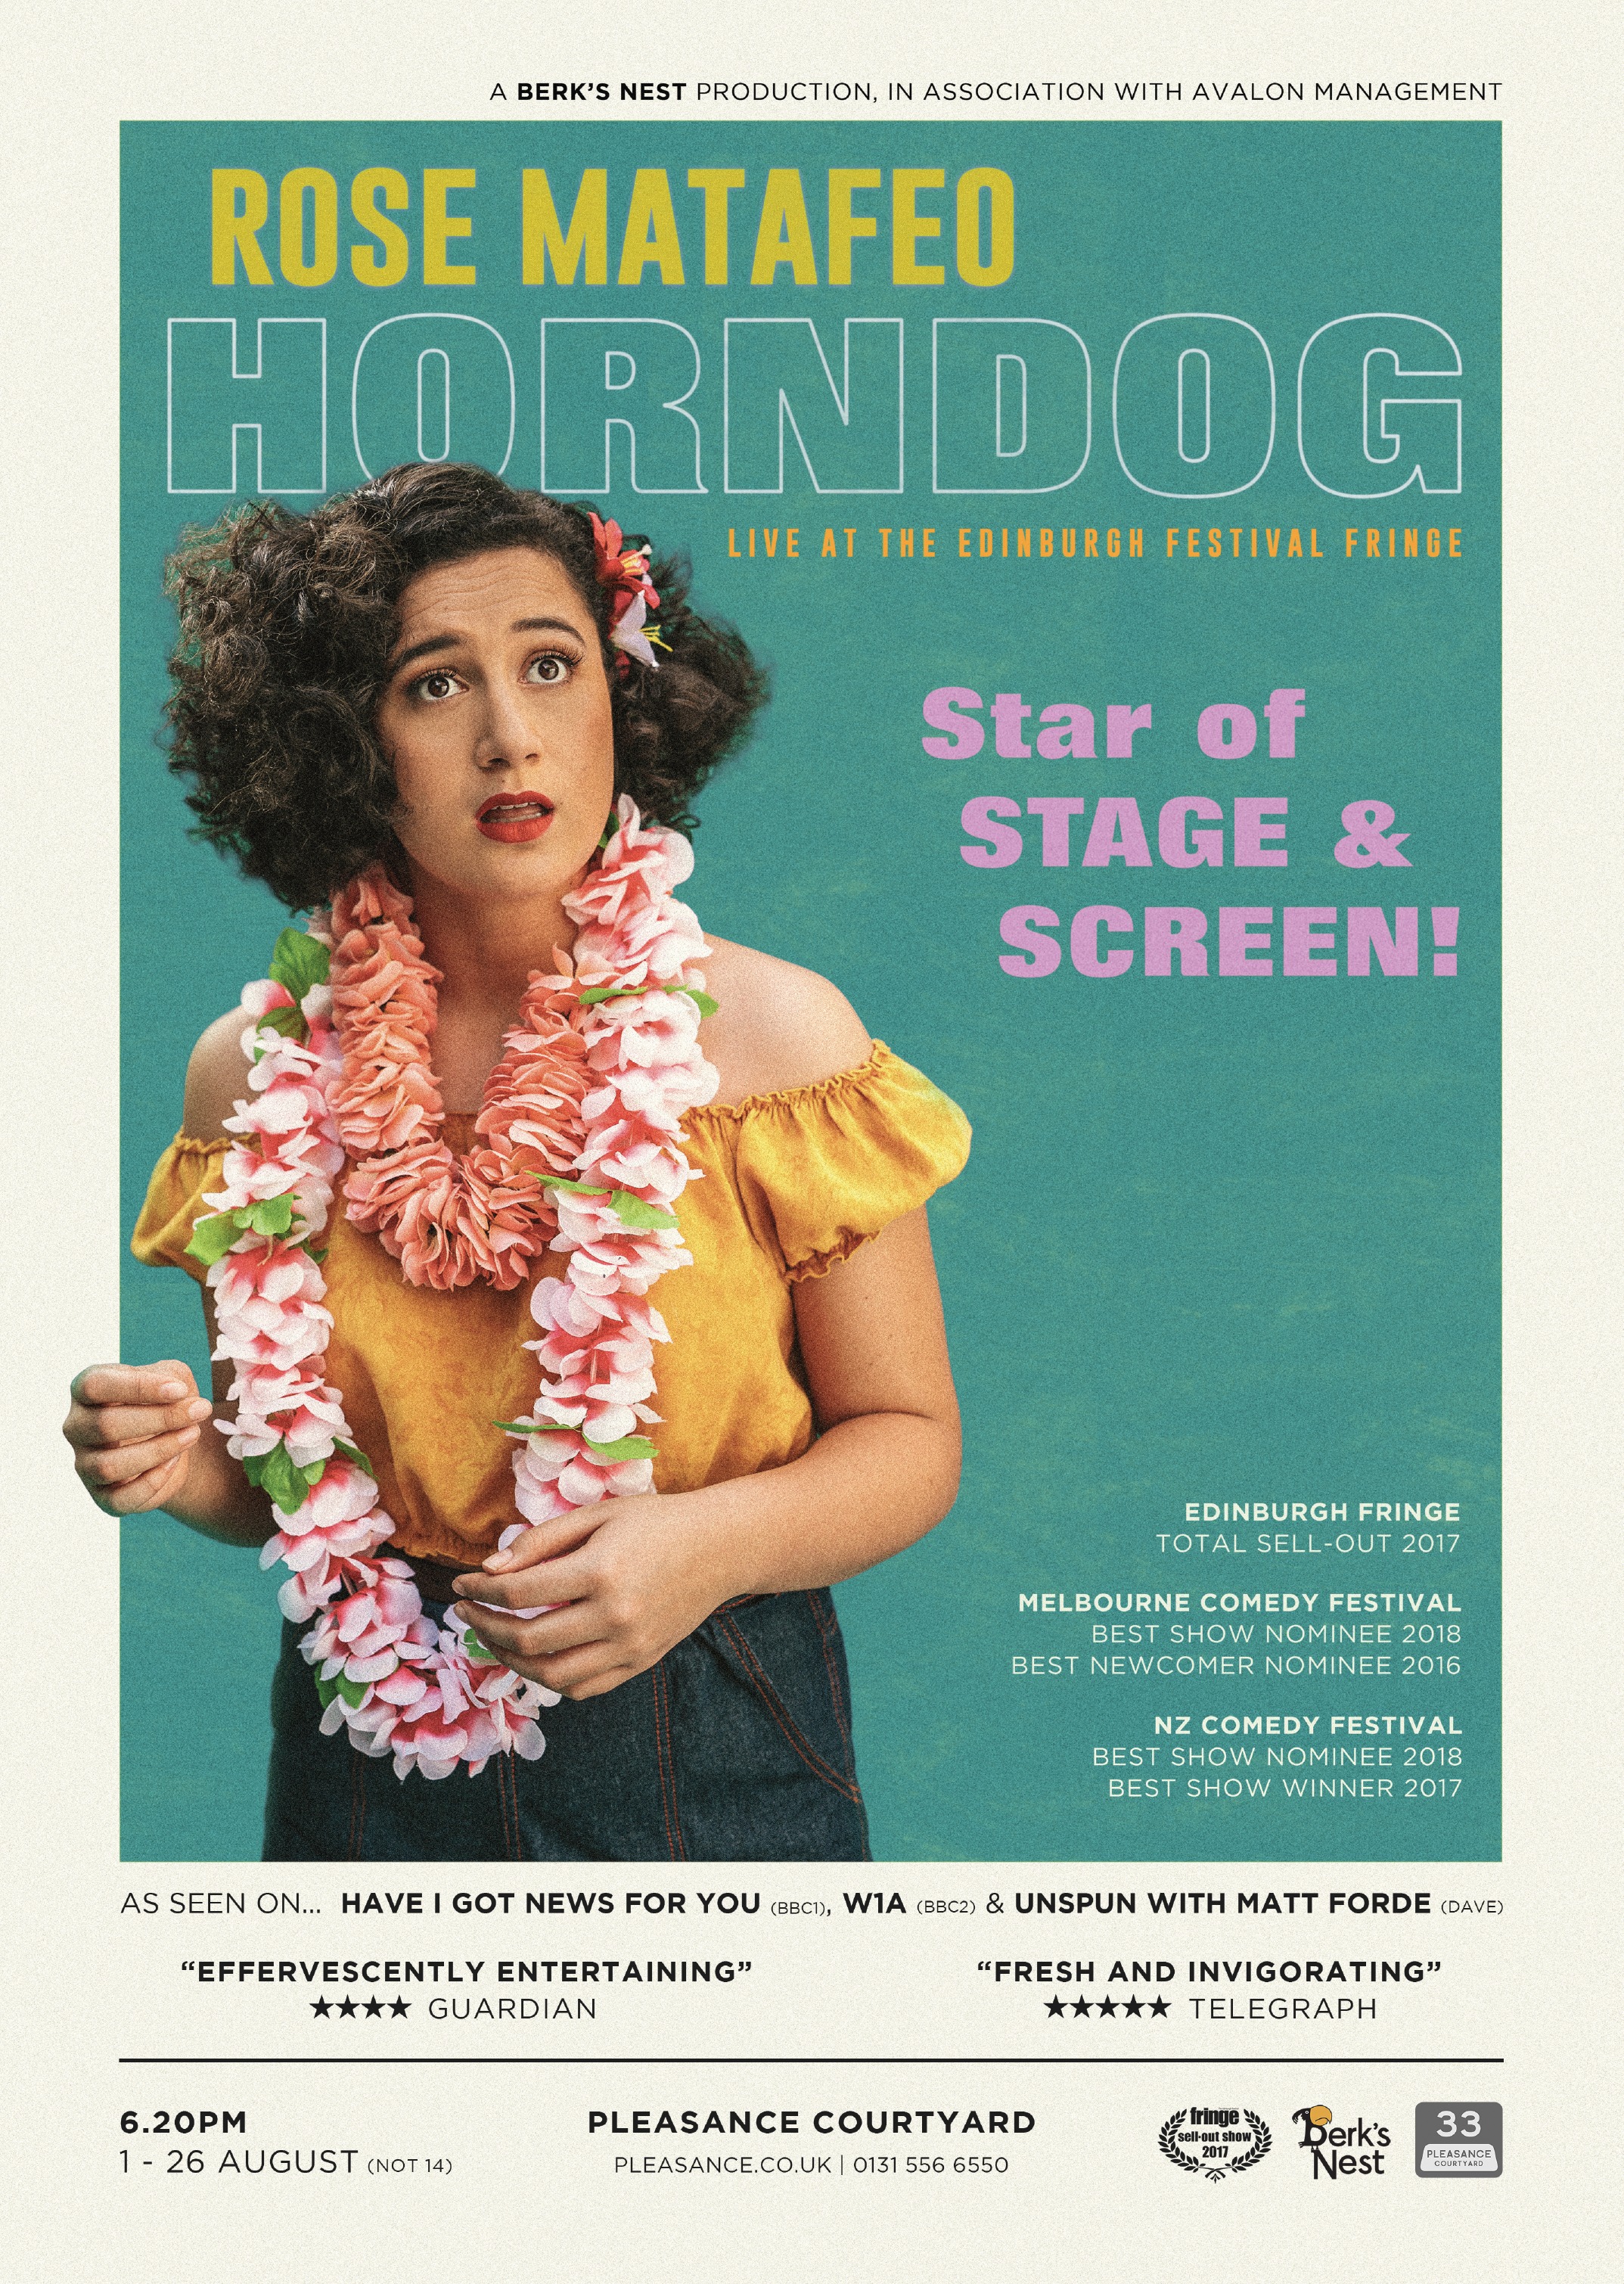 The poster for Rose Matafeo: Horndog